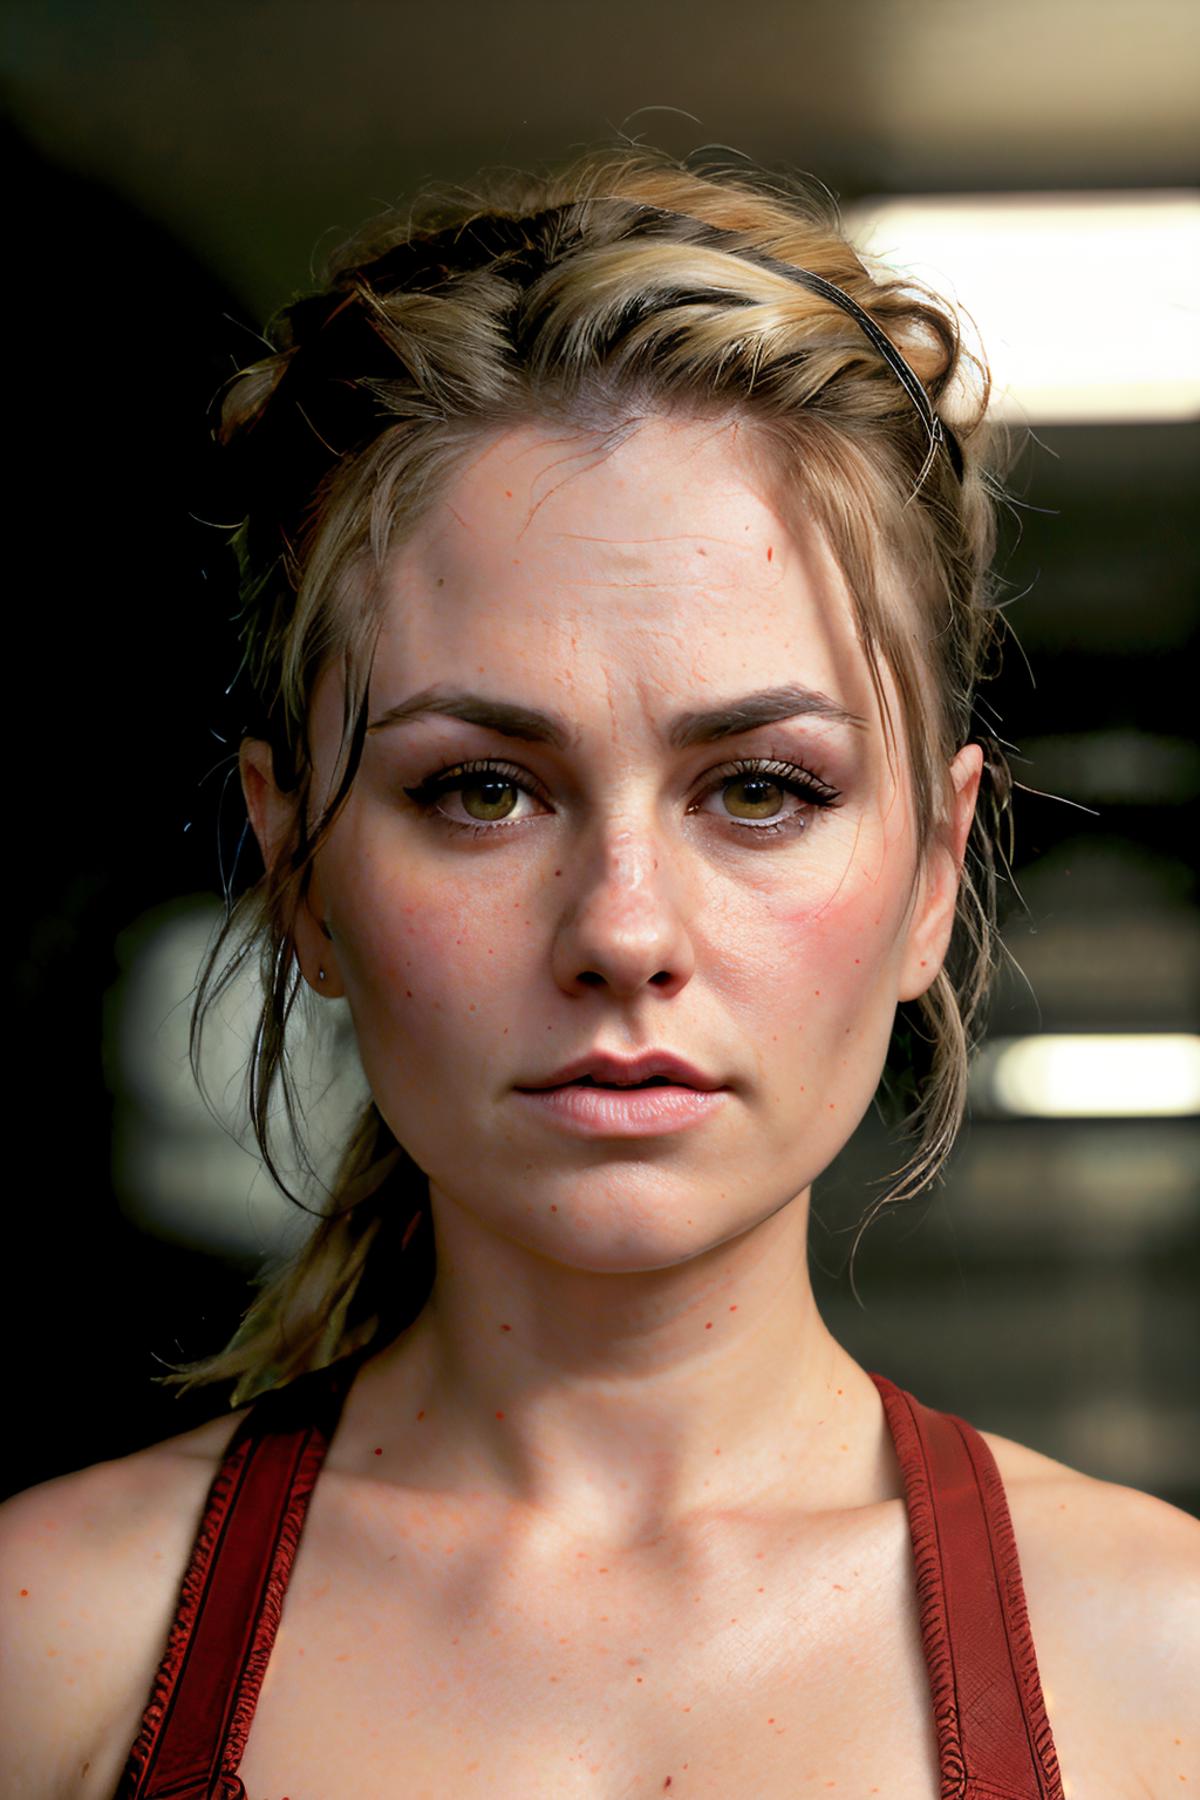 Anna Paquin image by frankyfrank2k